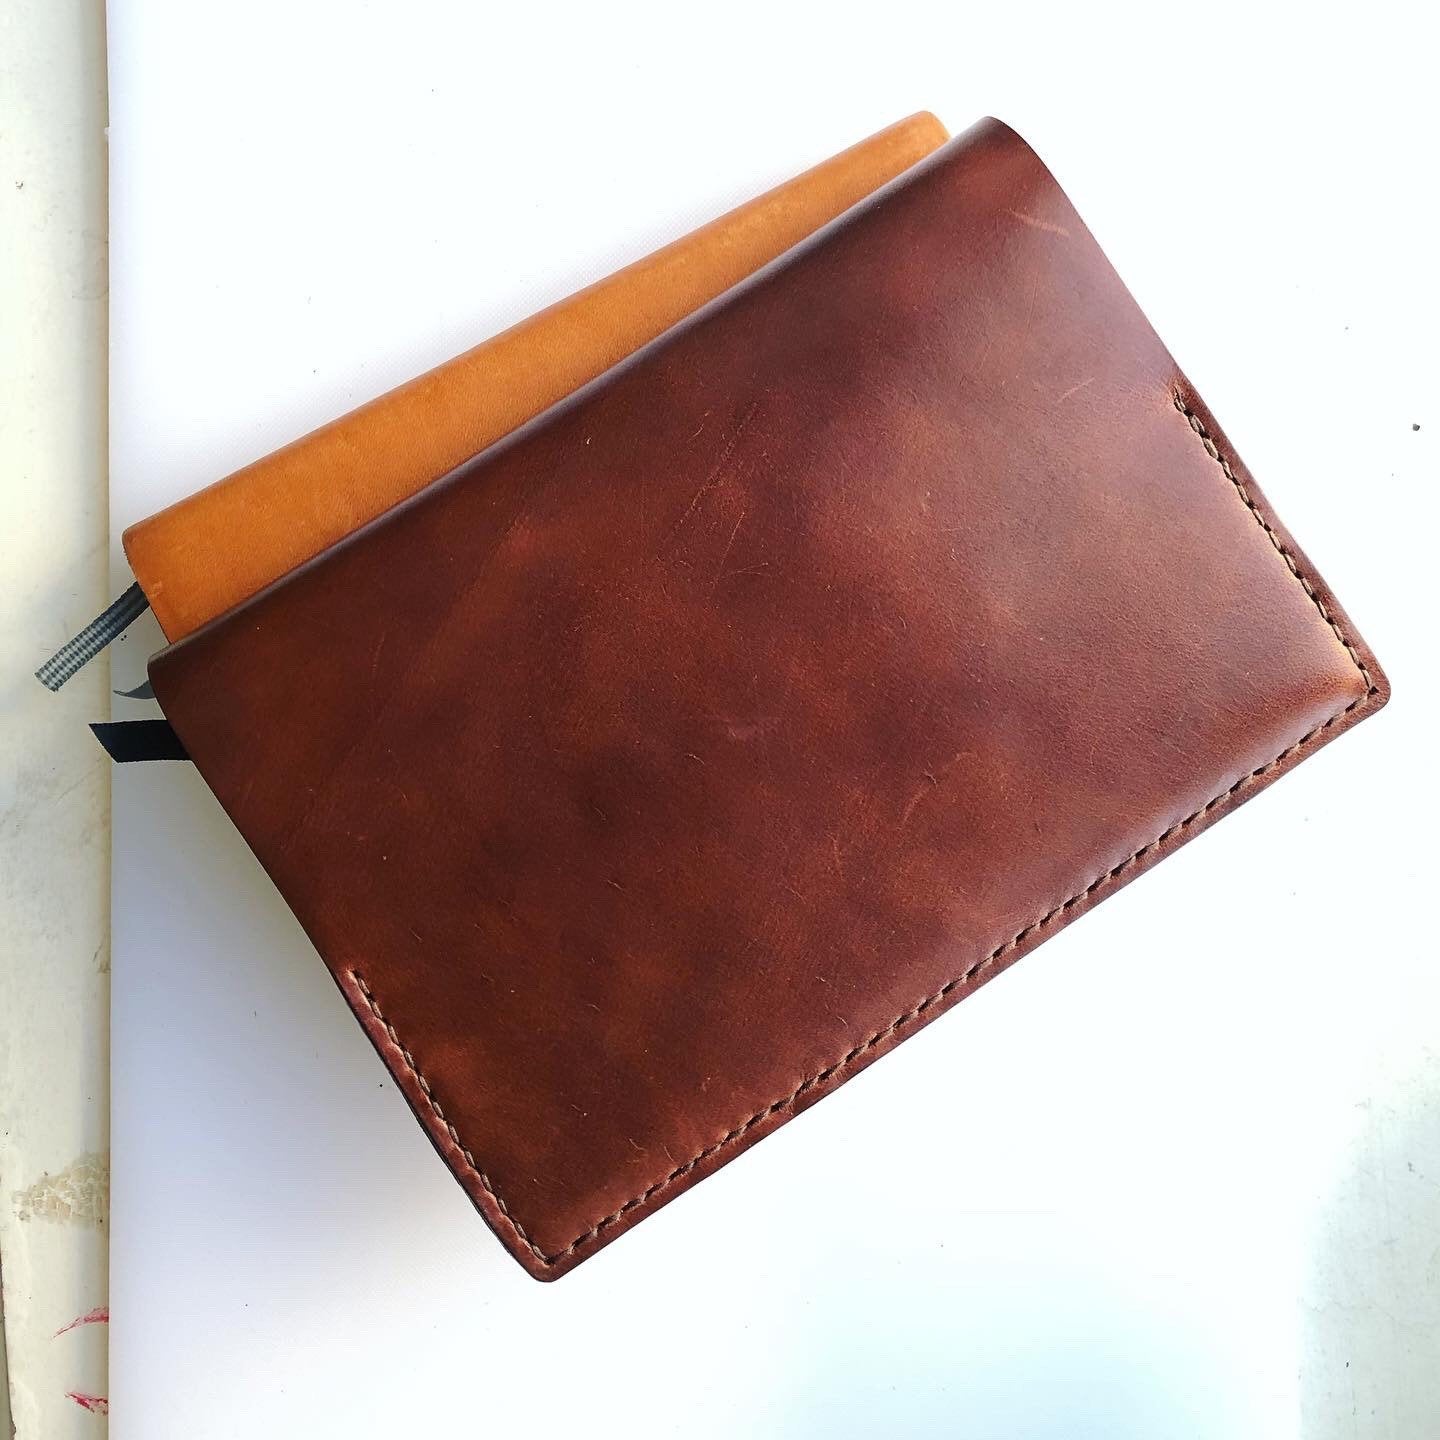 Handmade Leather A5 Sketchbook Cover, Vertical and Horizontal